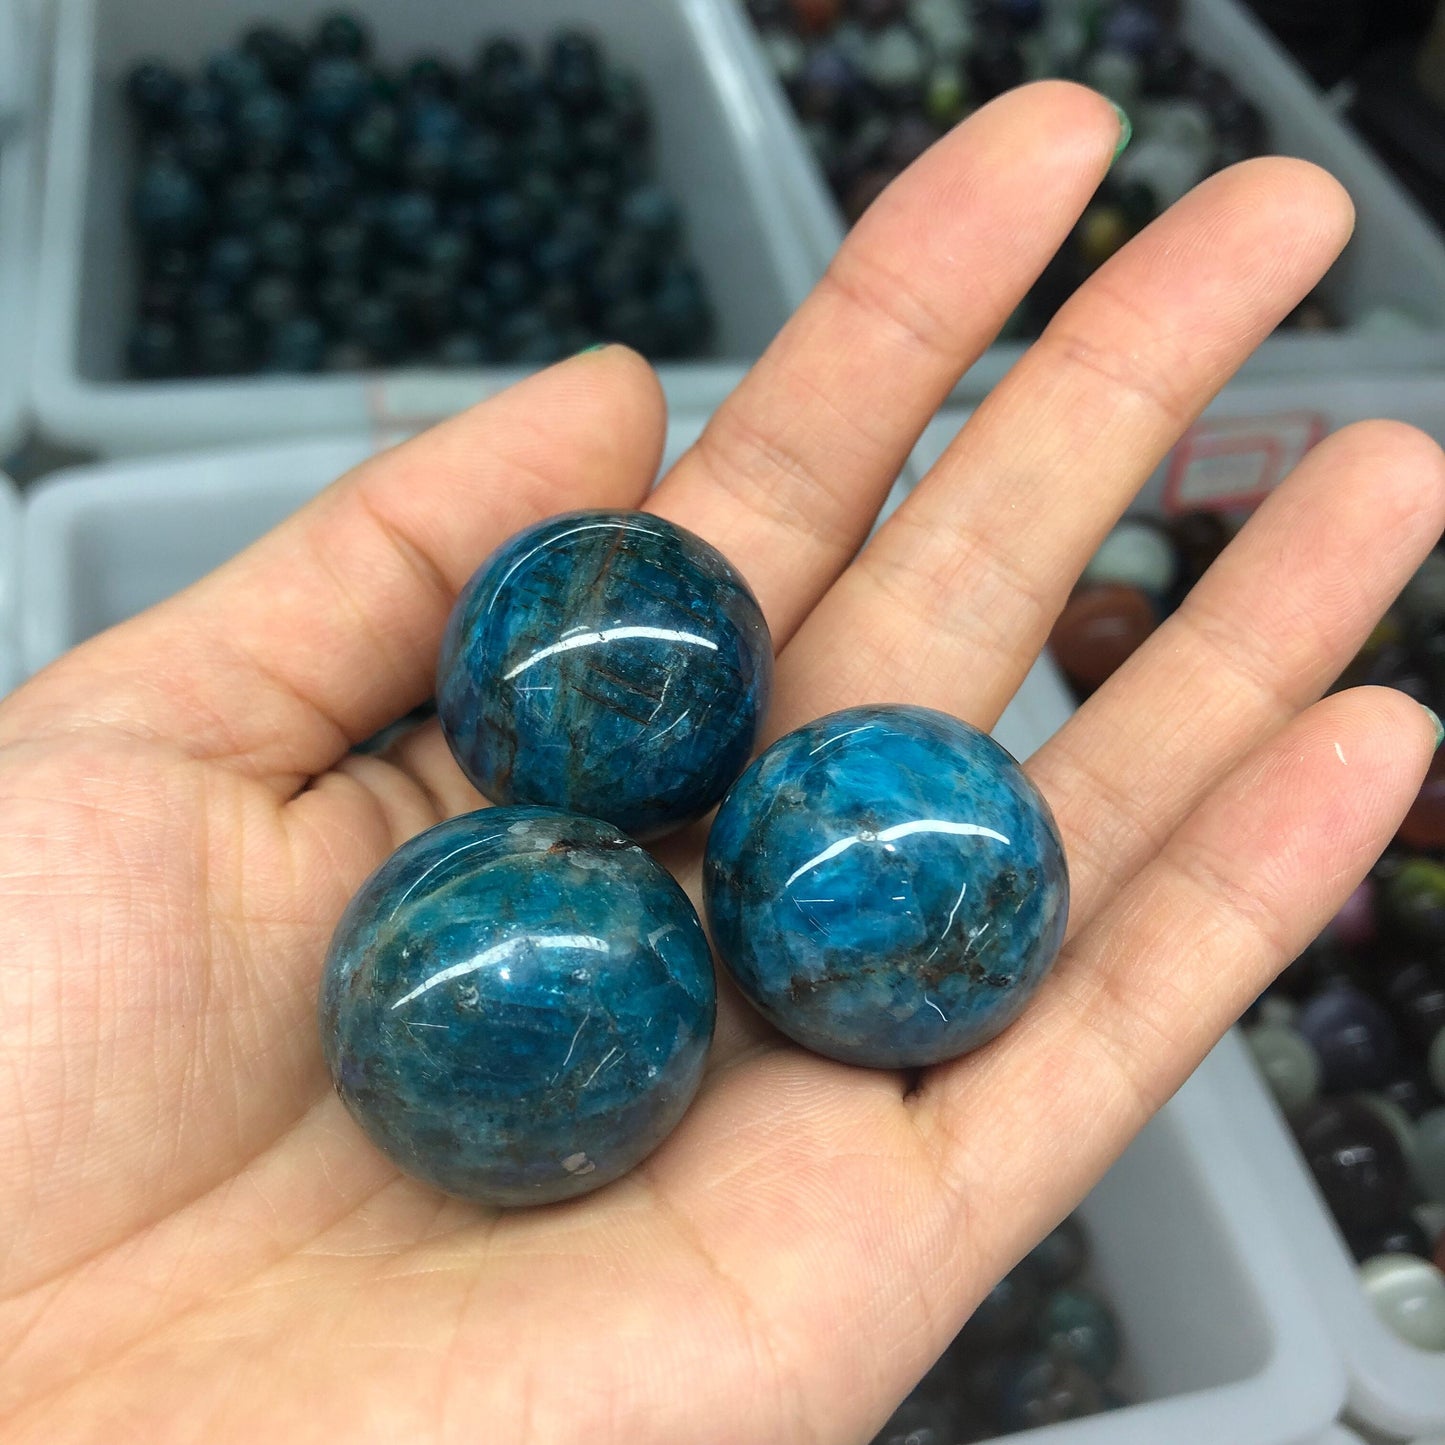 Natural Blue Apatite Stone Quartz Sphere Crystals - Set of 10 for Healing, Reiki, Home Decor and Energy - Perfect Gift Idea